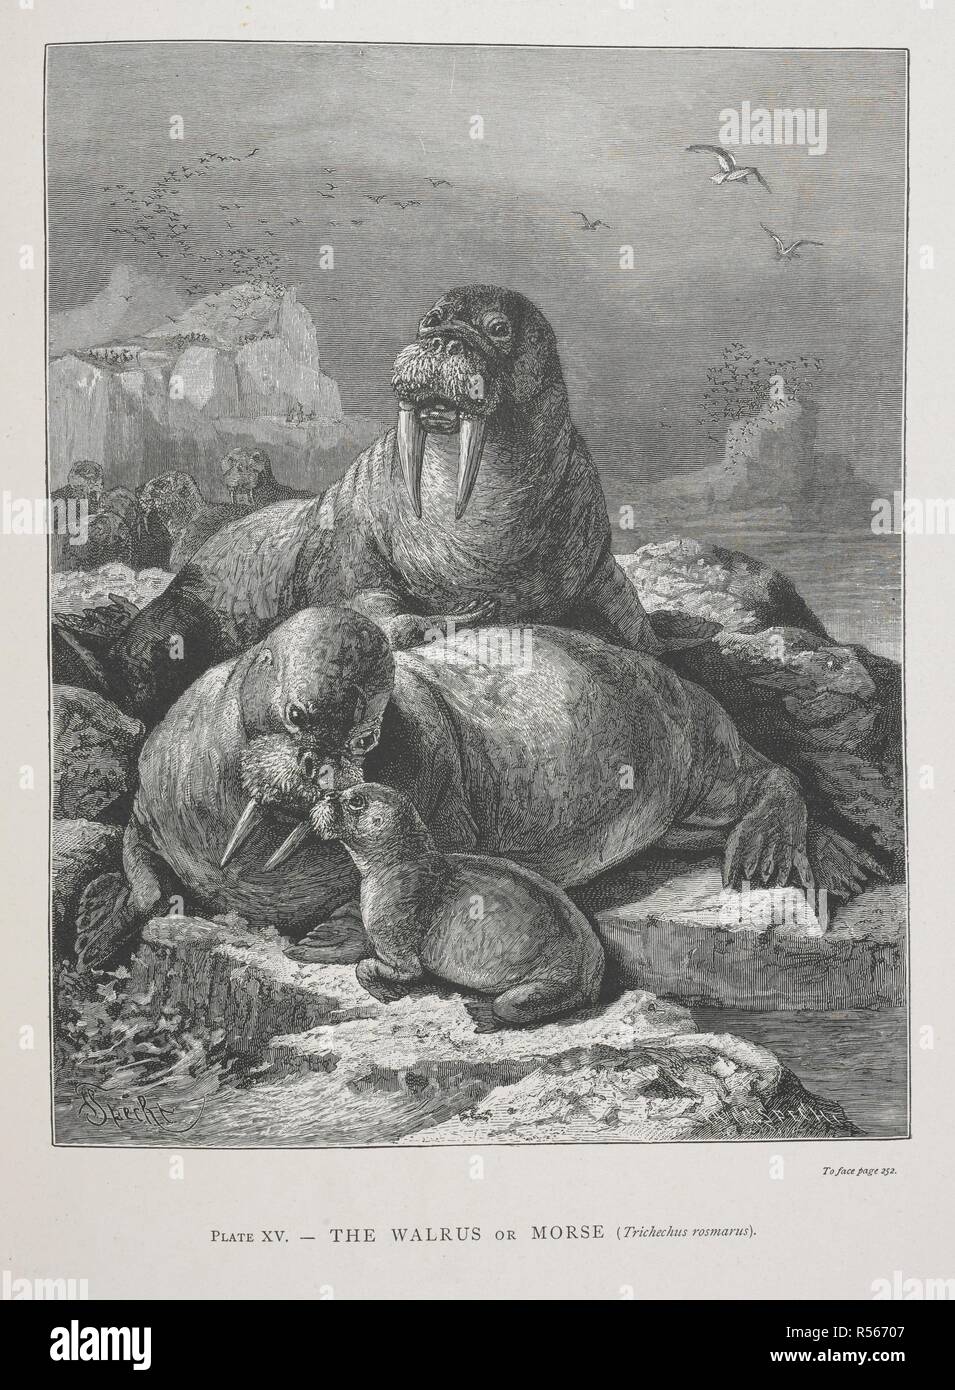 The Walrus or Morse. The Geographical Distribution of Animals, with a study of the relations of living and extinct faunas as elucidating the past changes of the earth's surface. ... . London, 1876. Source: 07209.dd.1 plate XV. Author: WALLACE, ALFRED RUSSEL. Stock Photo